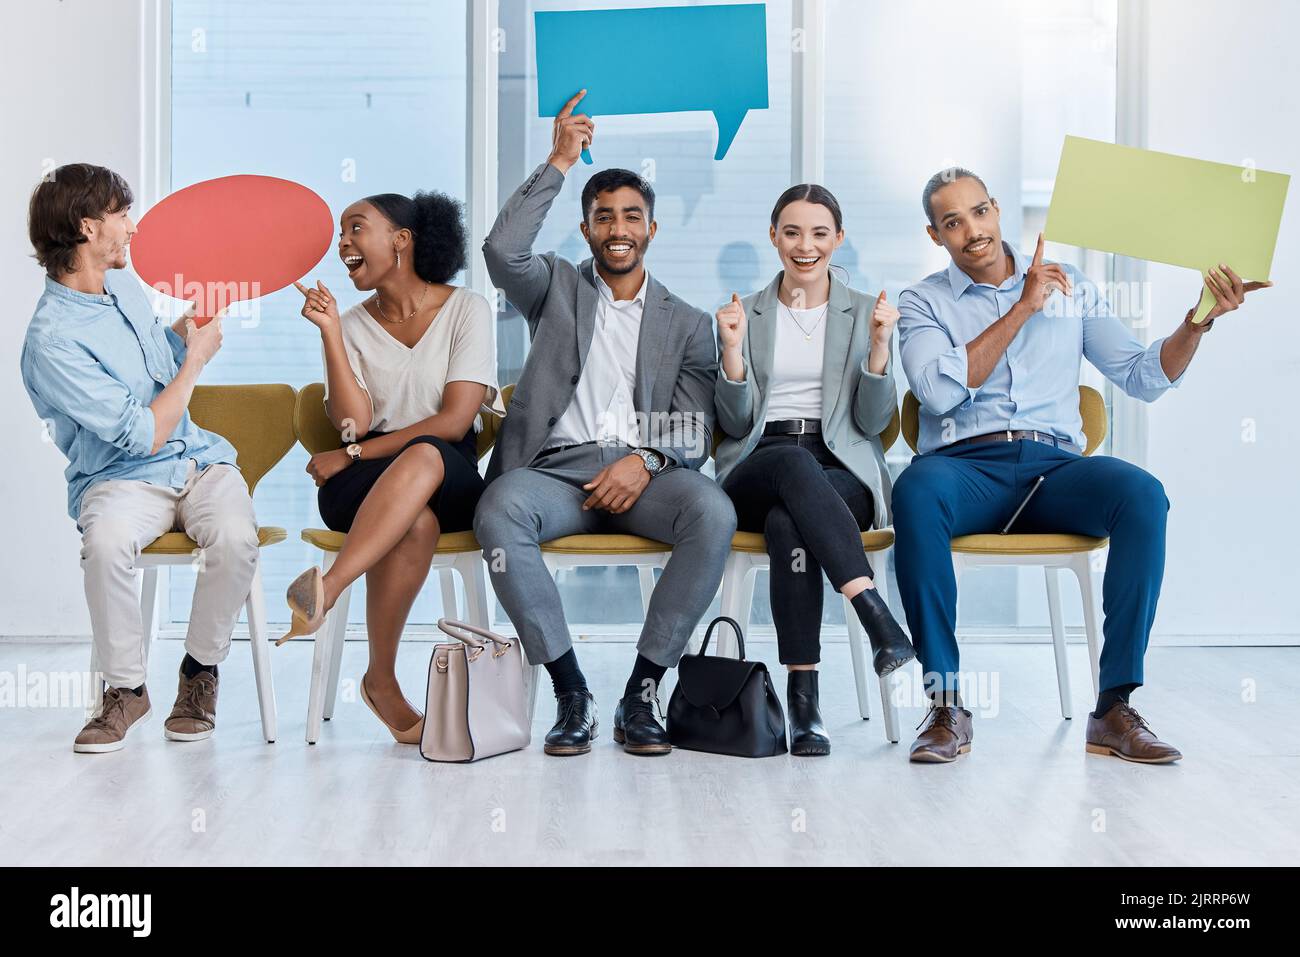 Speech bubbles, voice and vote by business people happy and sitting in an office. A diverse team of employees holding empty comment signs or icons for Stock Photo